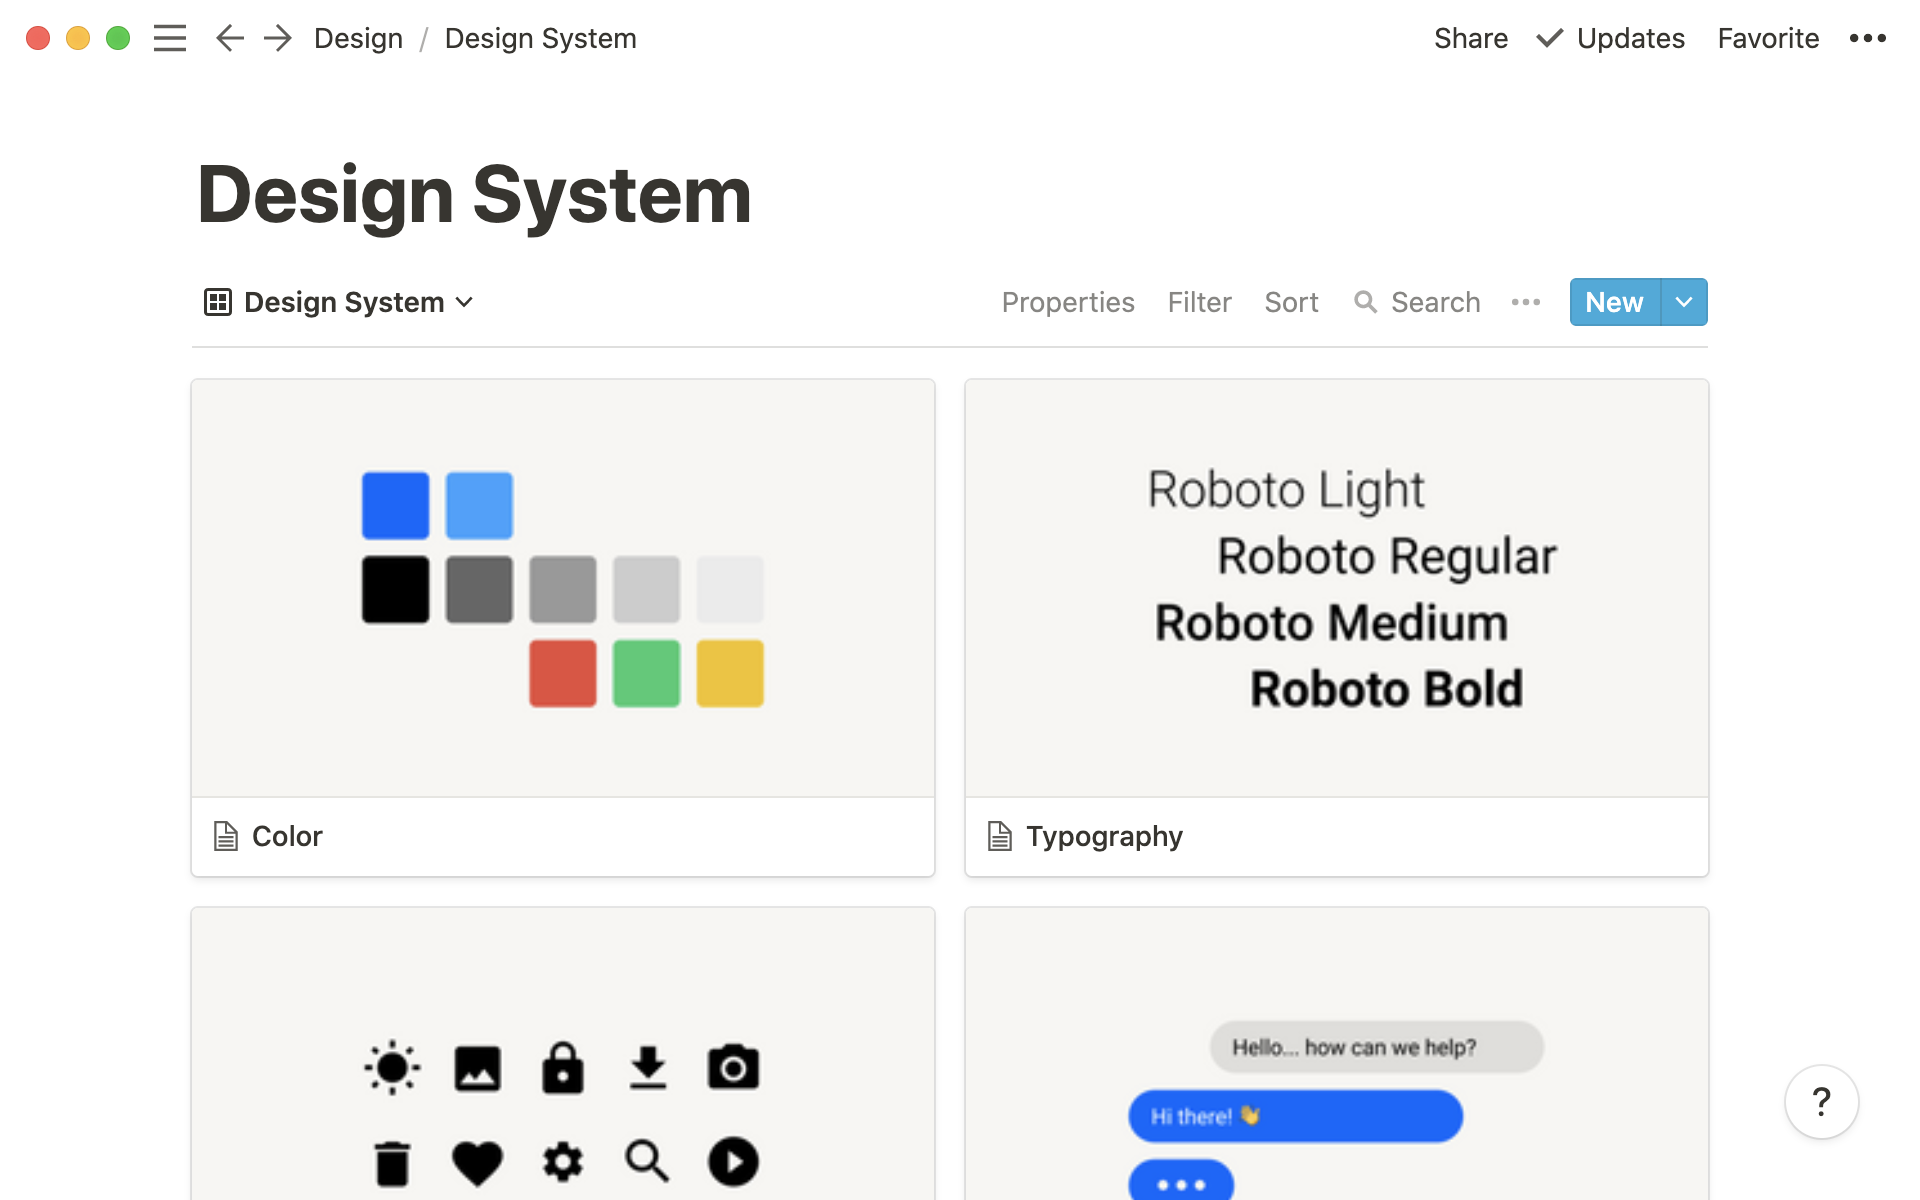 Populate your design system with individual pages for different design elements.